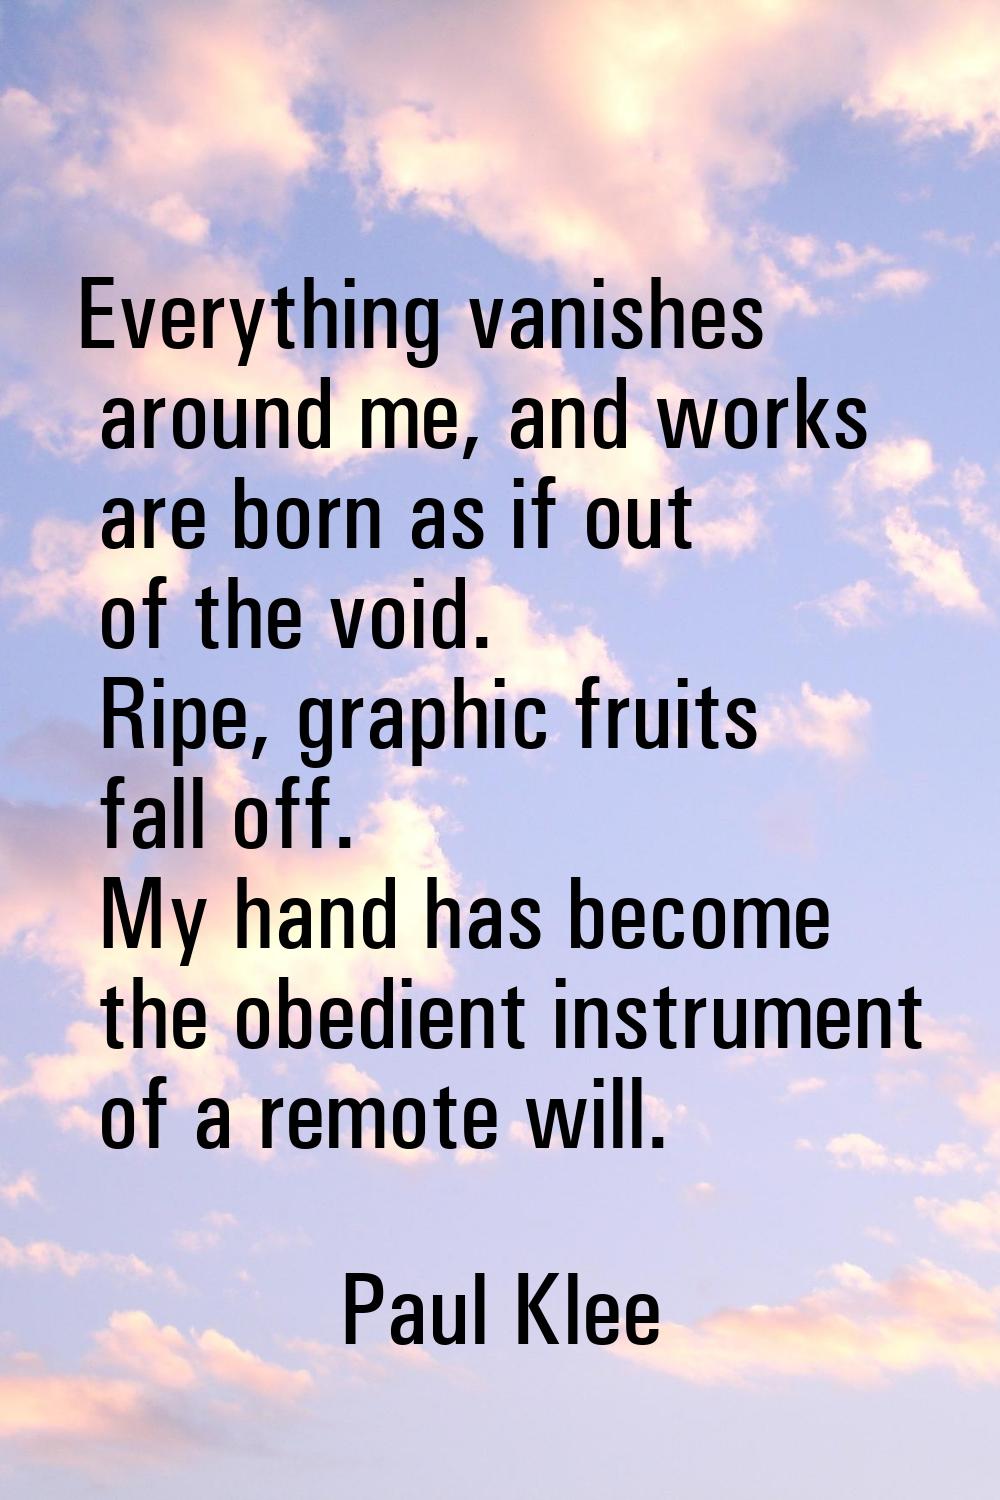 Everything vanishes around me, and works are born as if out of the void. Ripe, graphic fruits fall 